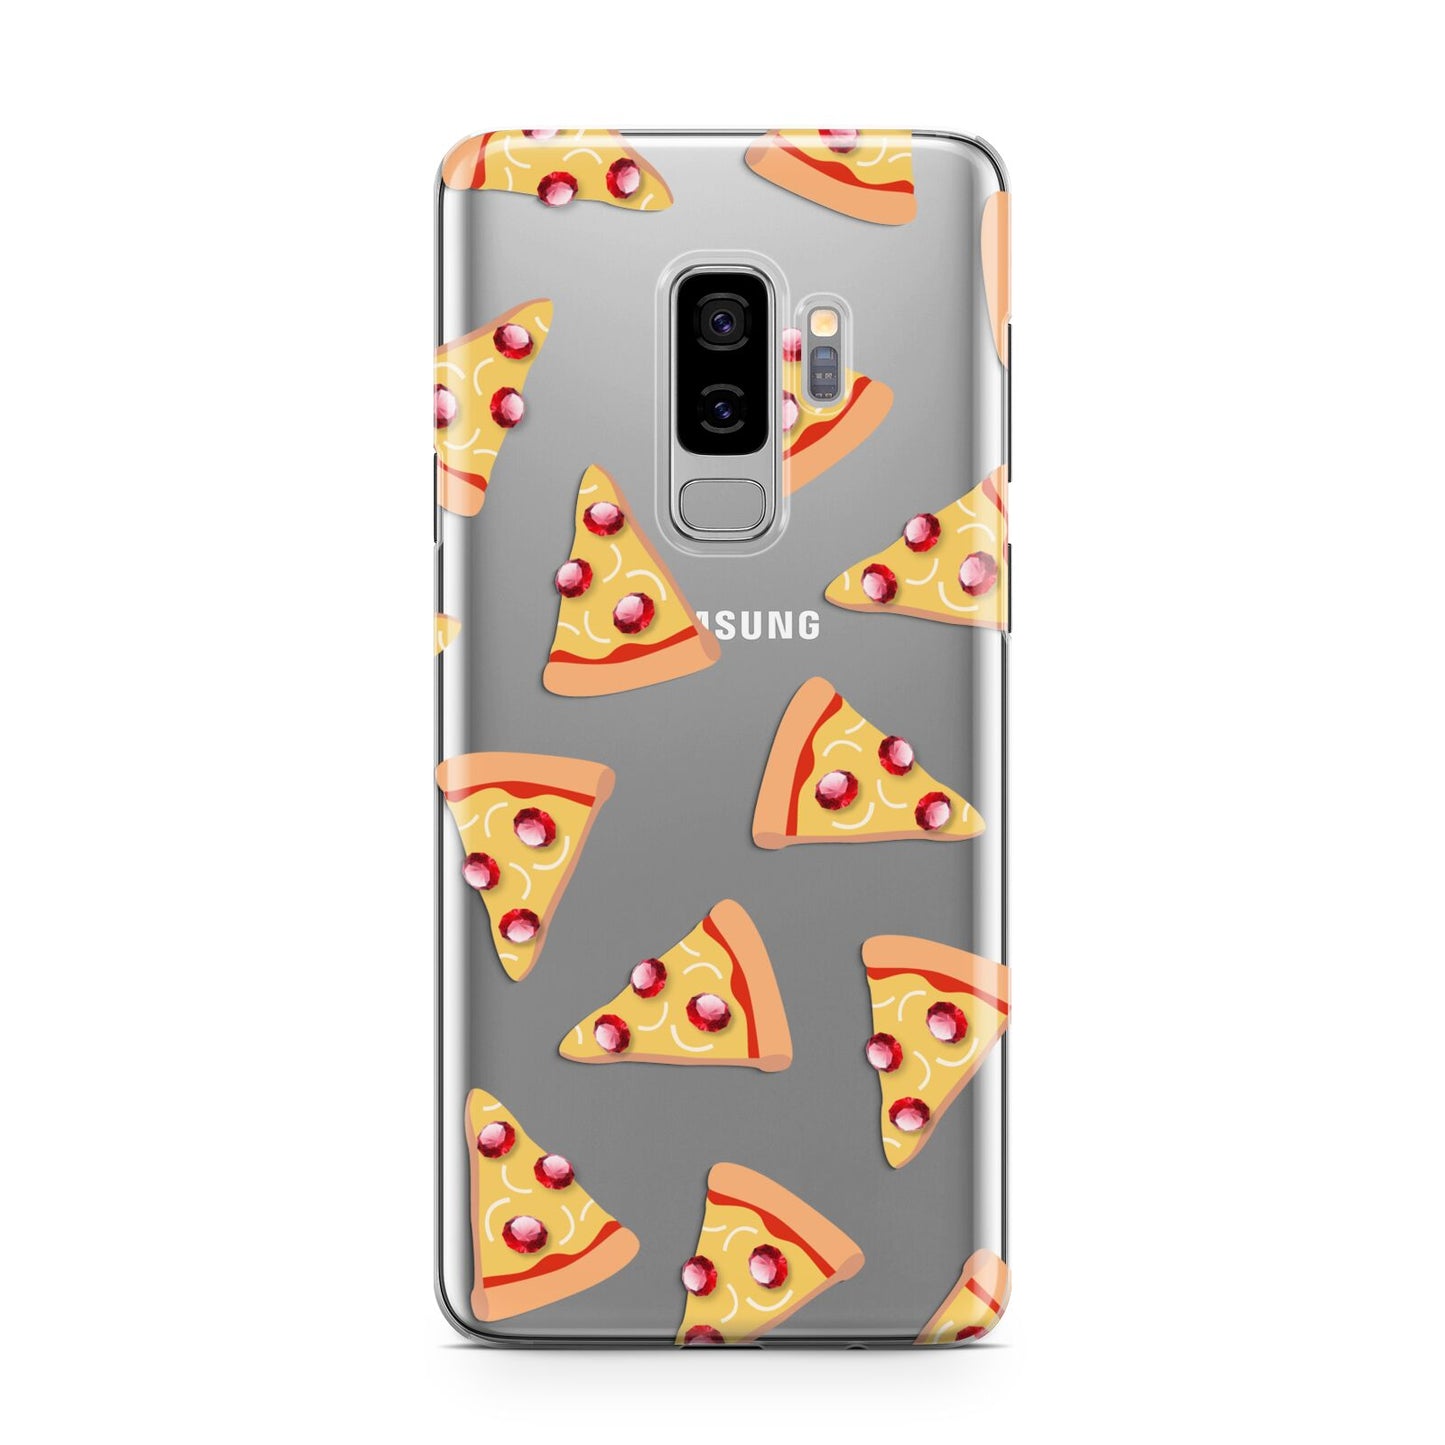 Rubies on Cartoon Pizza Slices Samsung Galaxy S9 Plus Case on Silver phone